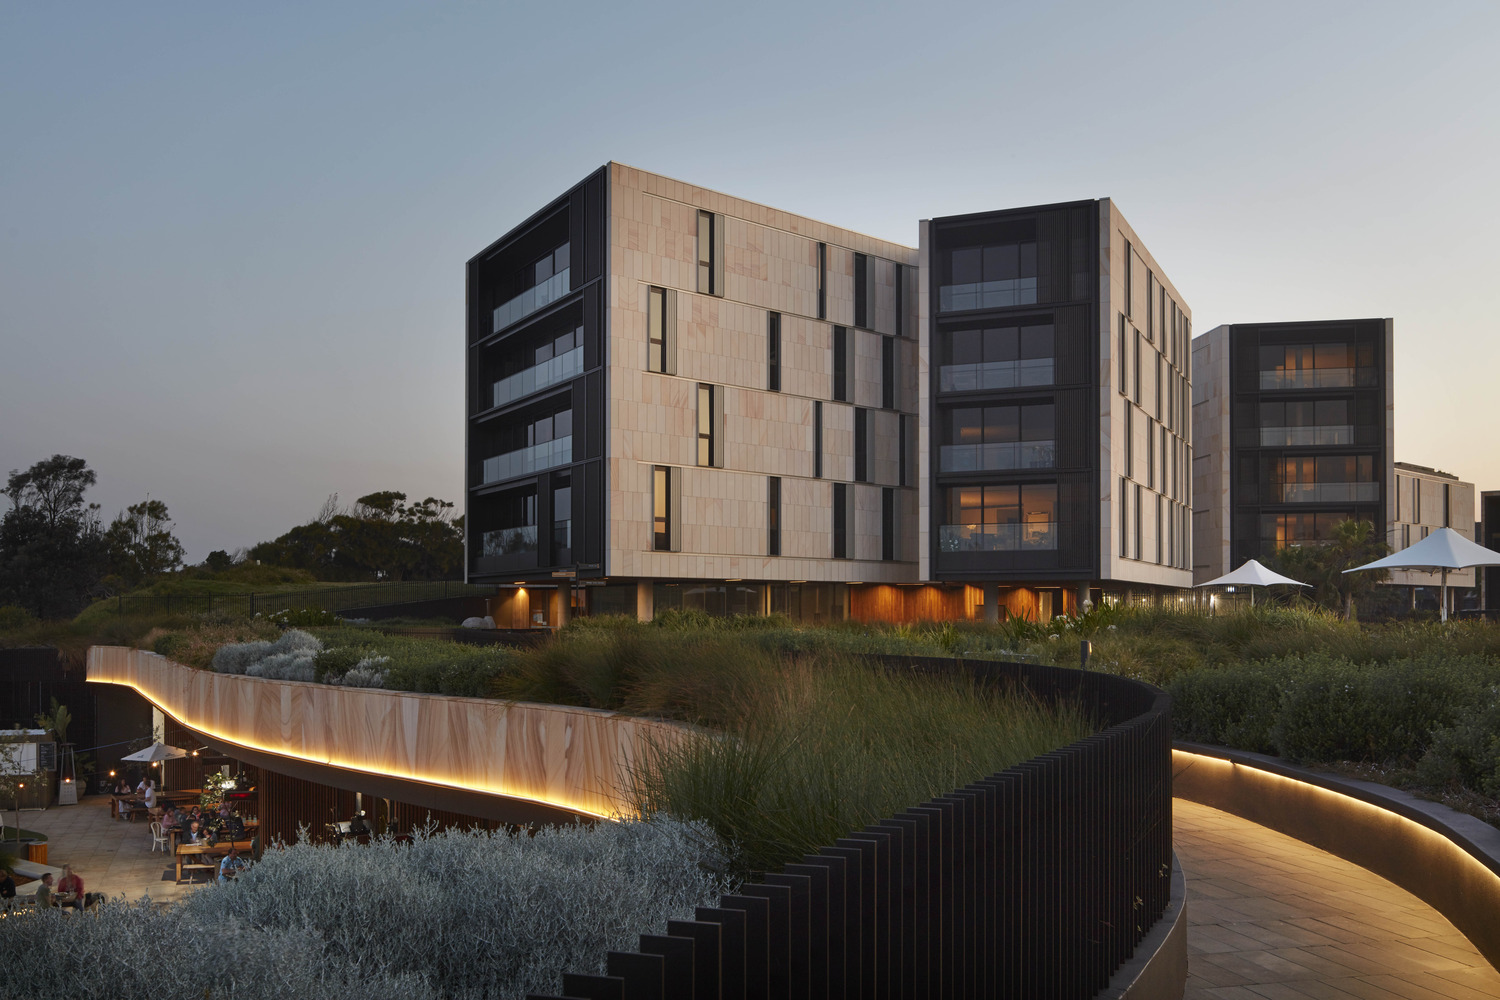 15+ years of sustainable architecture with the Green Building Council of Australia